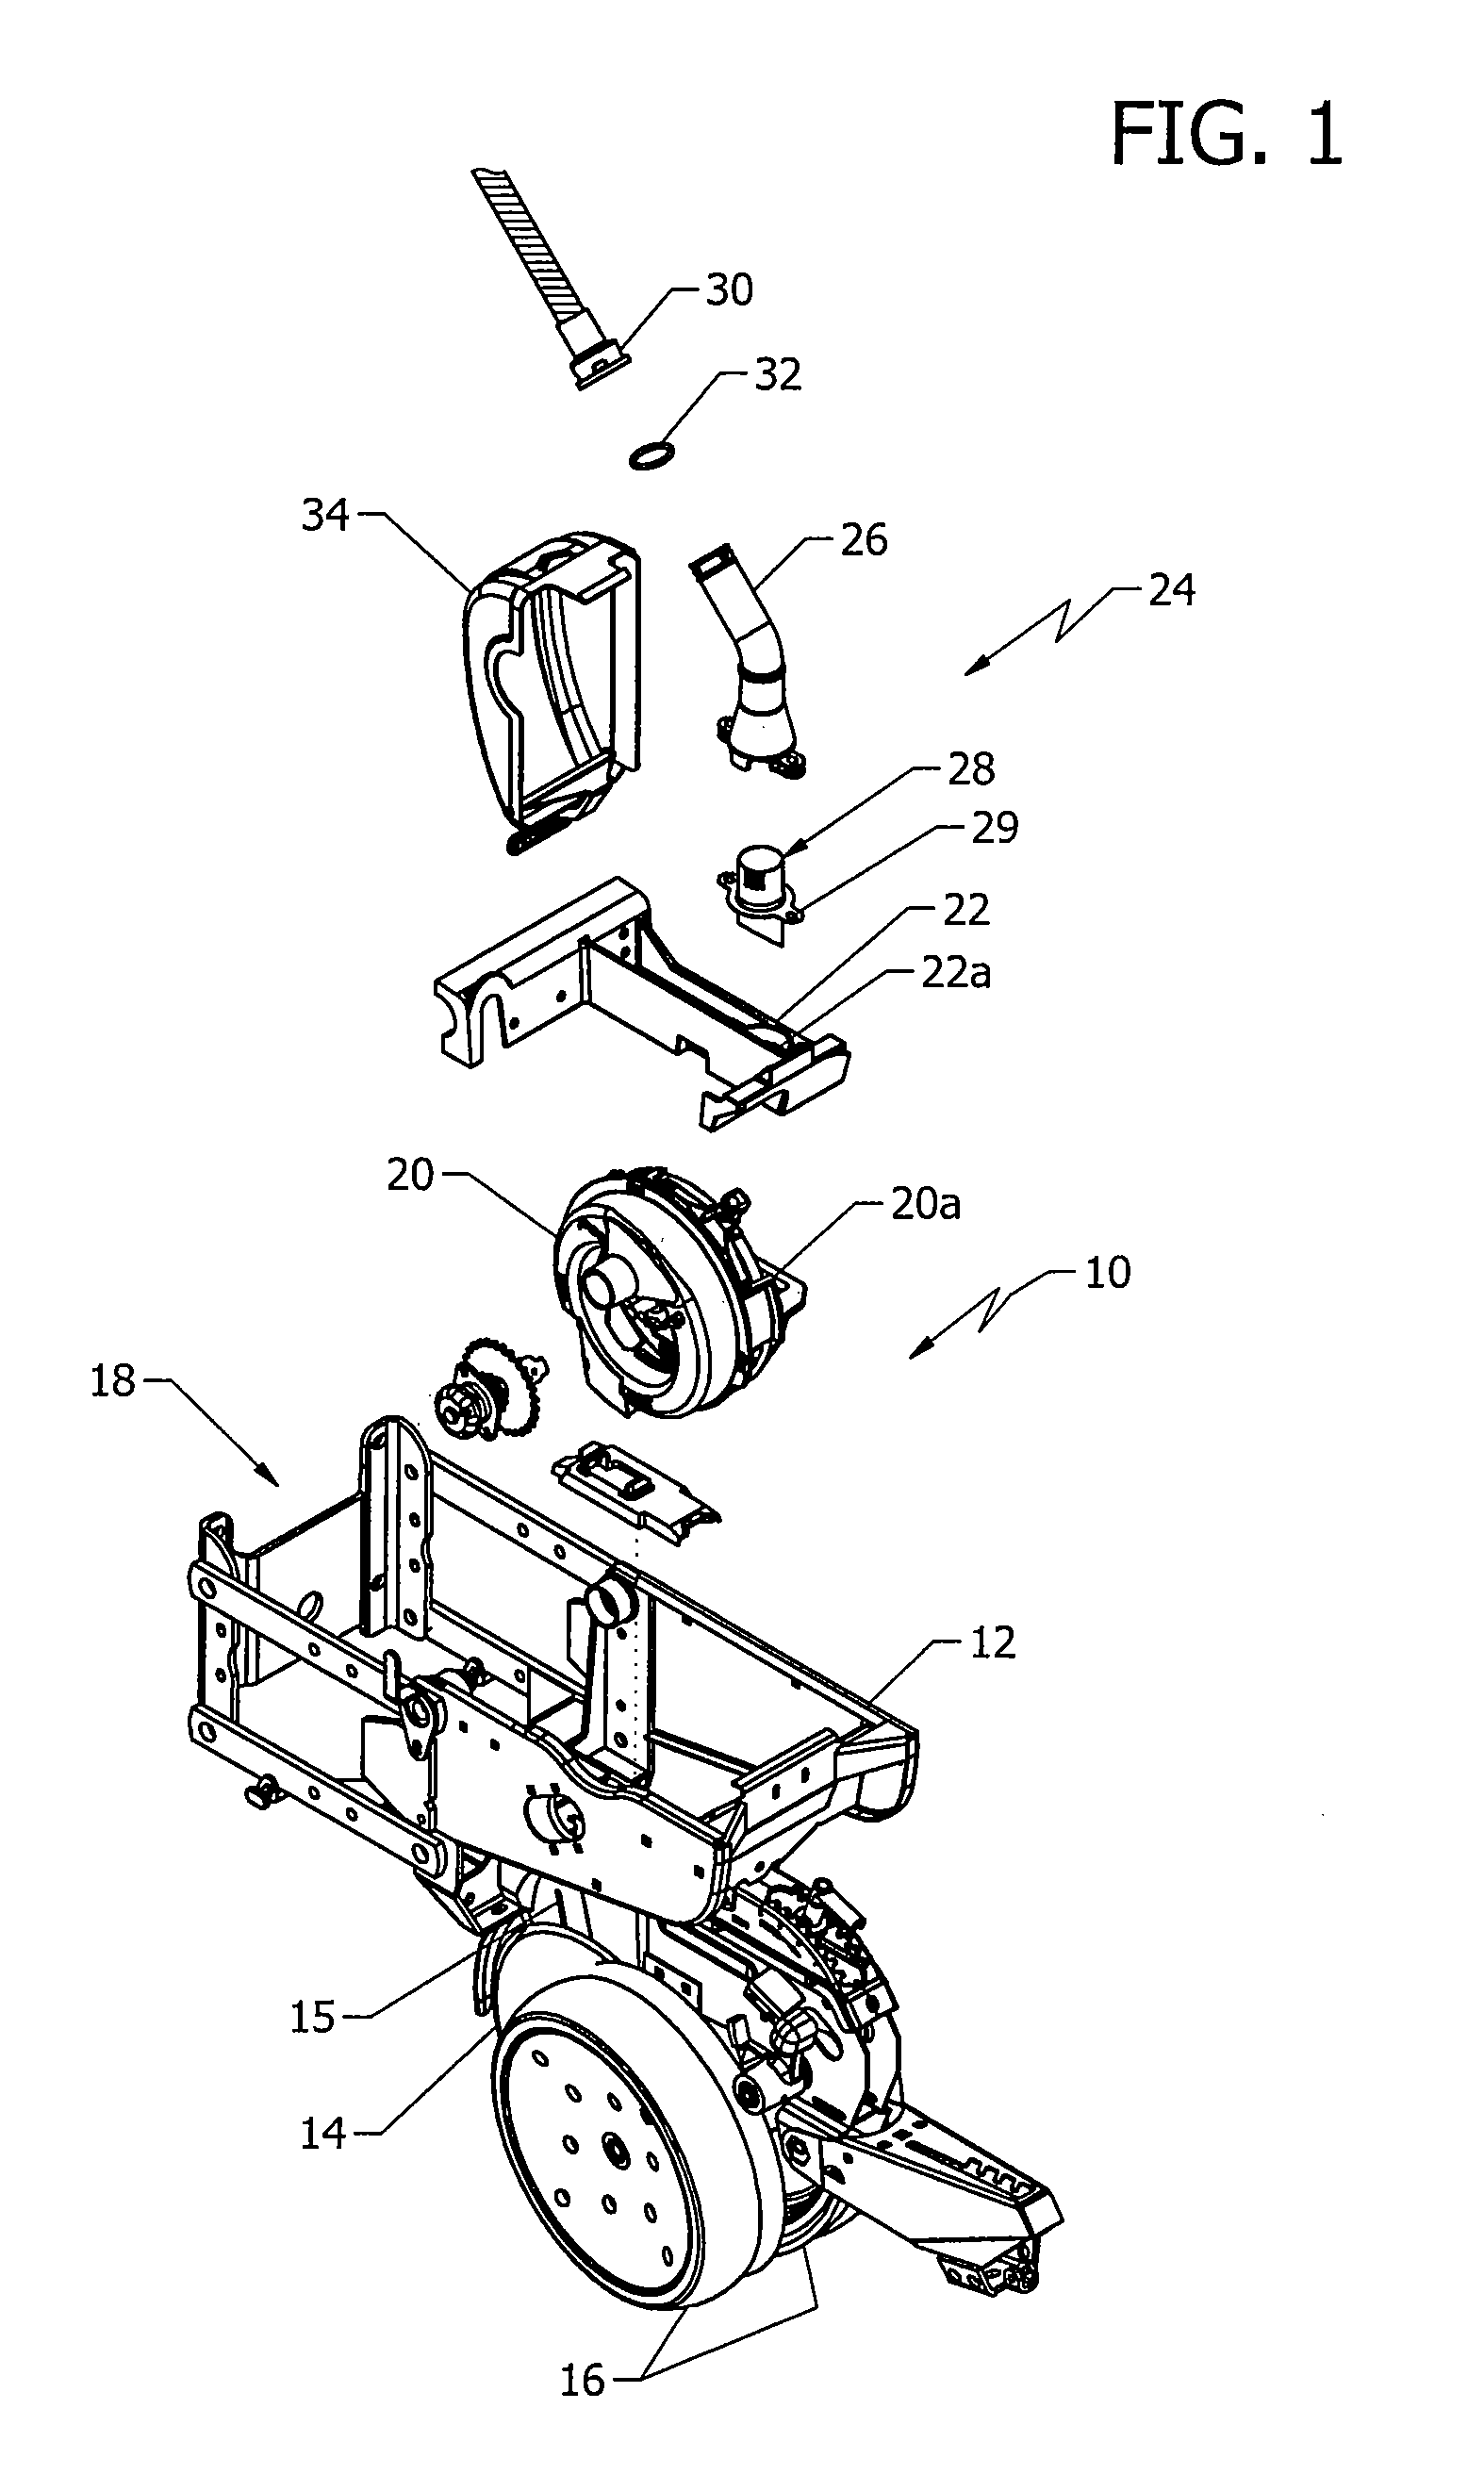 Air pressure dissipator for air seed delivery system